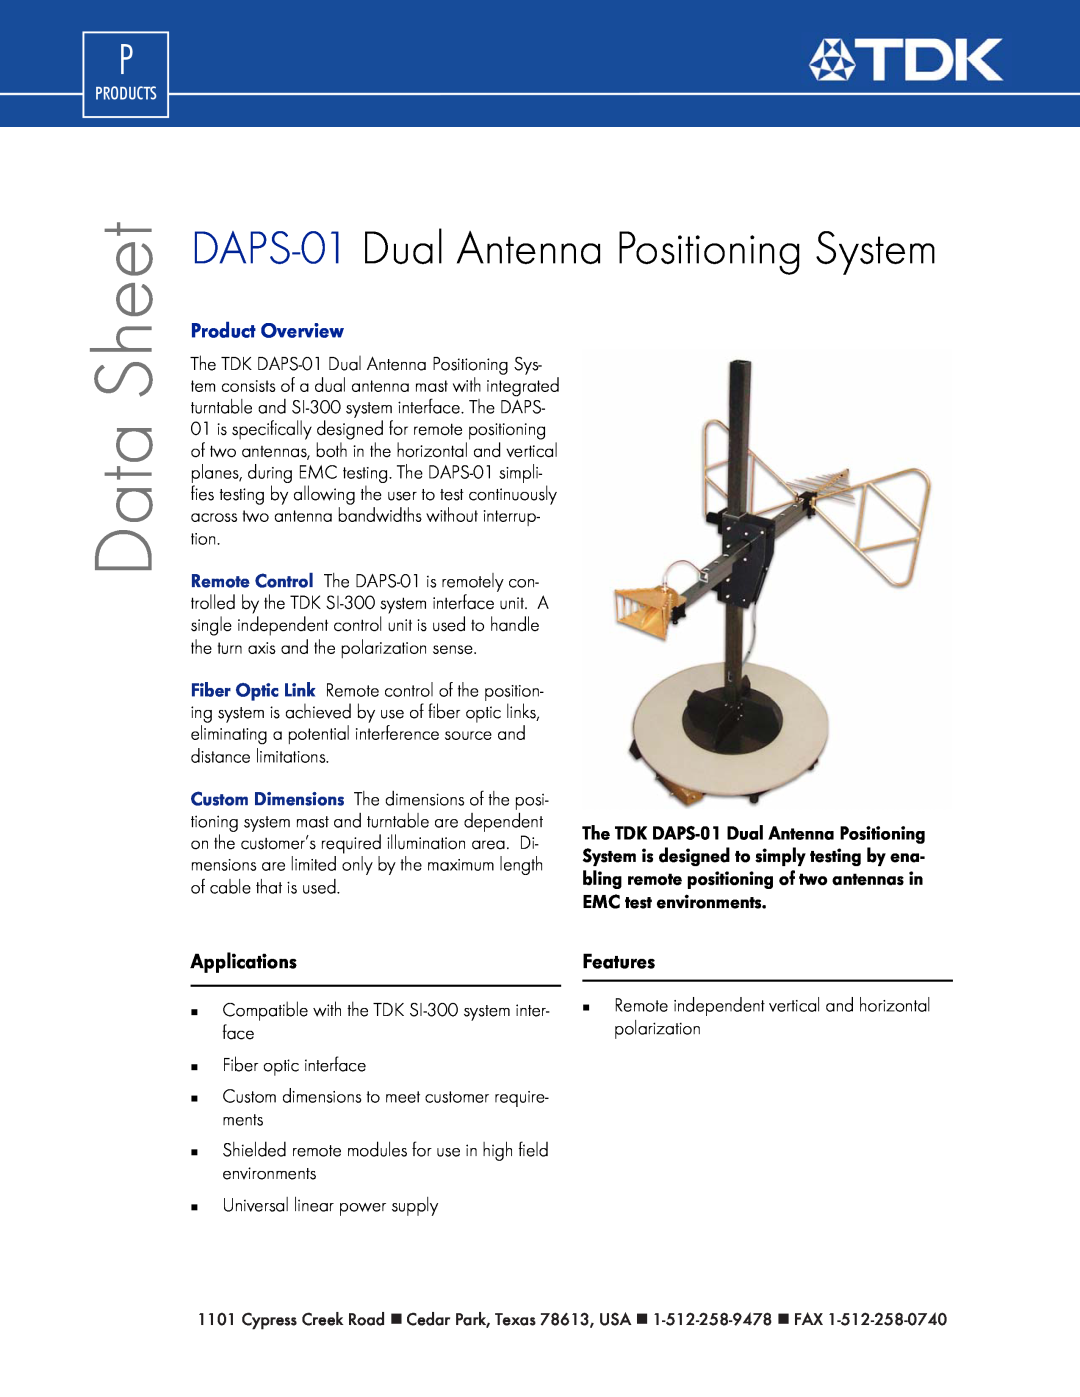 TDK dimensions DAPS-01 Dual Antenna Positioning System, Applications, Features, Data, Sheet, Product Overview 